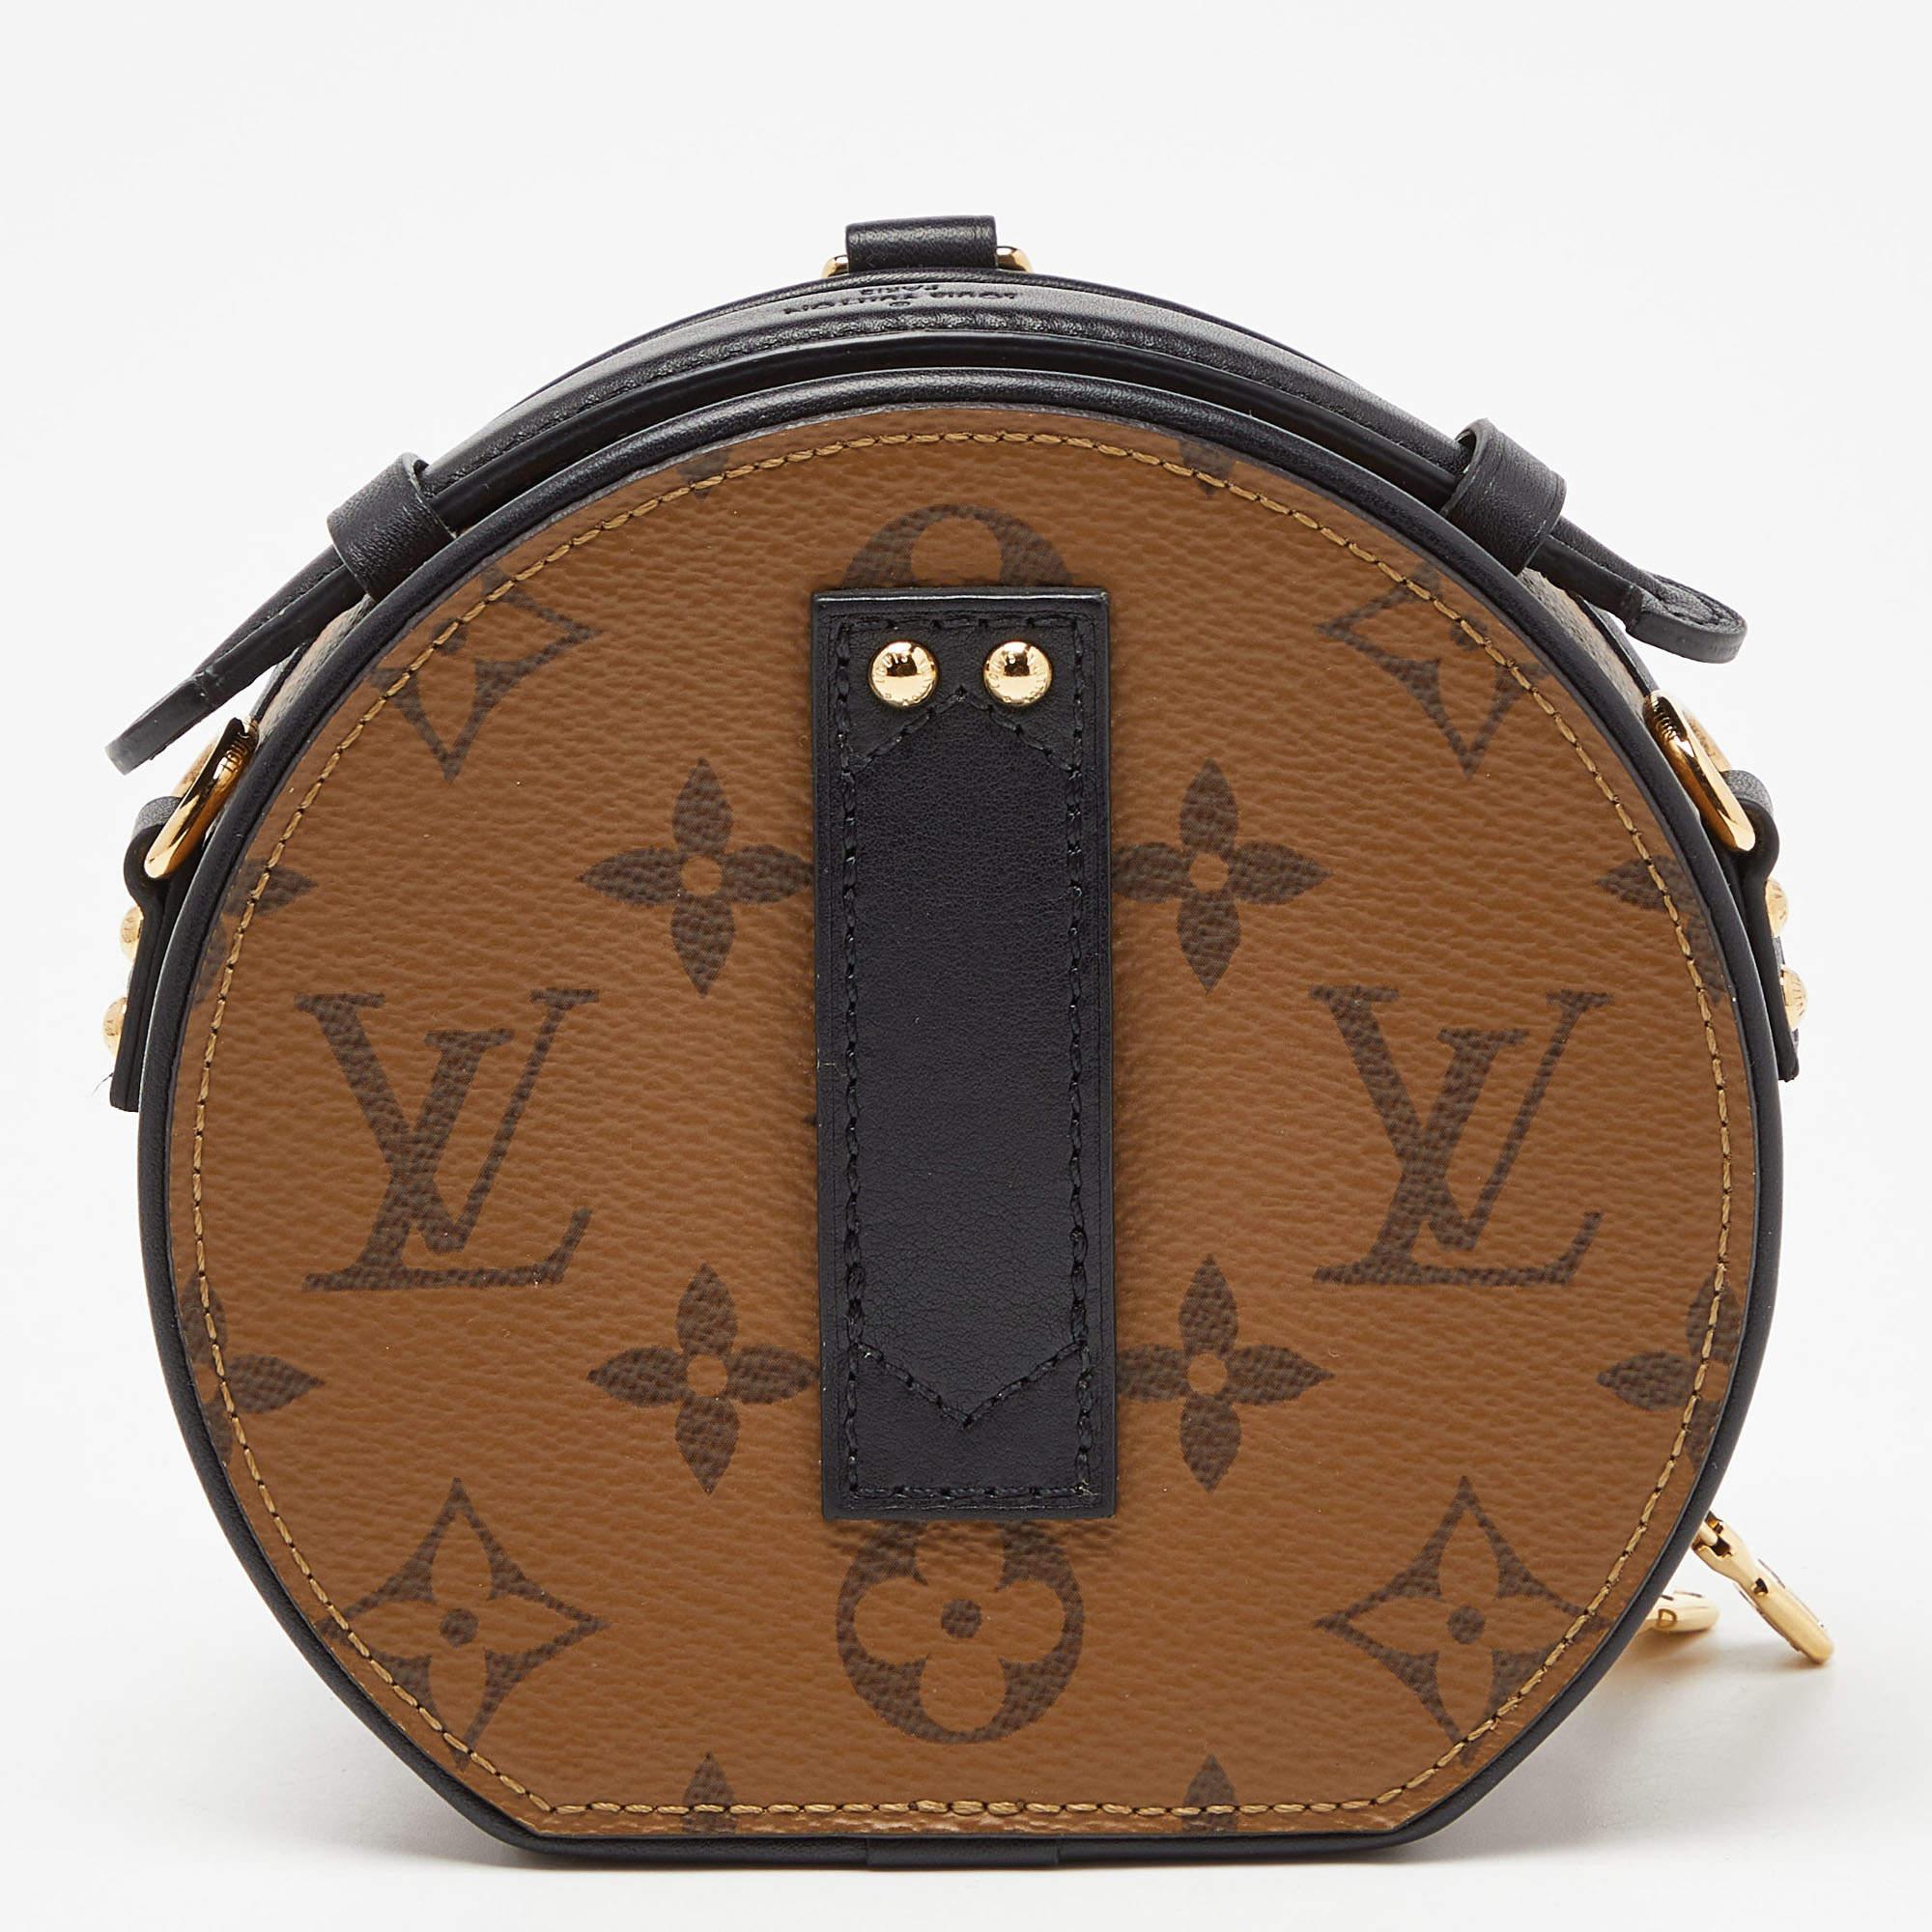 First seen on the Cruise 2018 runway show, Nicolas Ghesquière designed the Petite Boite Chapeau as a reimagined version of one of the brand's famous travel bags, the Hatbox. We have here the mini Boite Chapeau in Monogram canvas, holding the